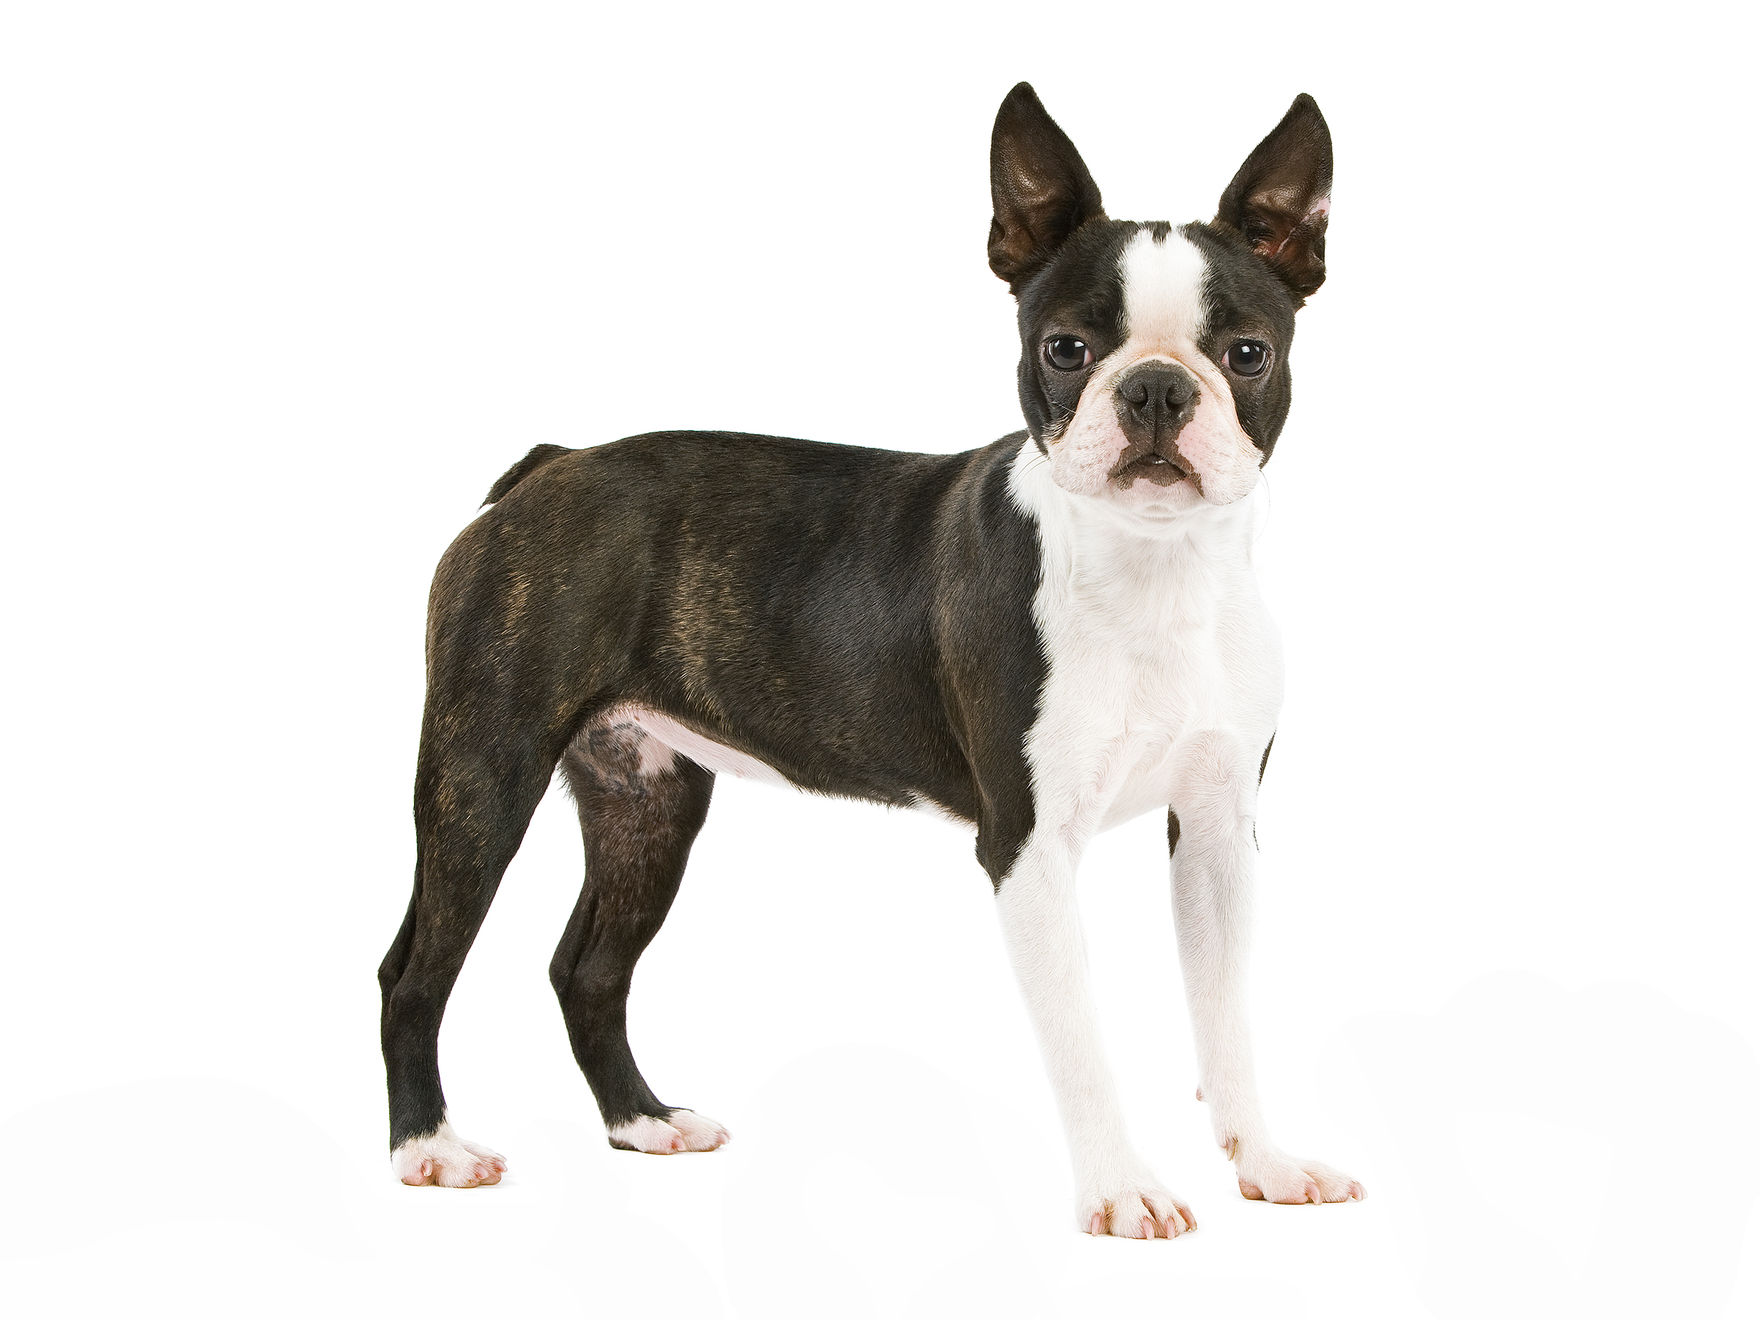 Boston Terrier adult in black and white